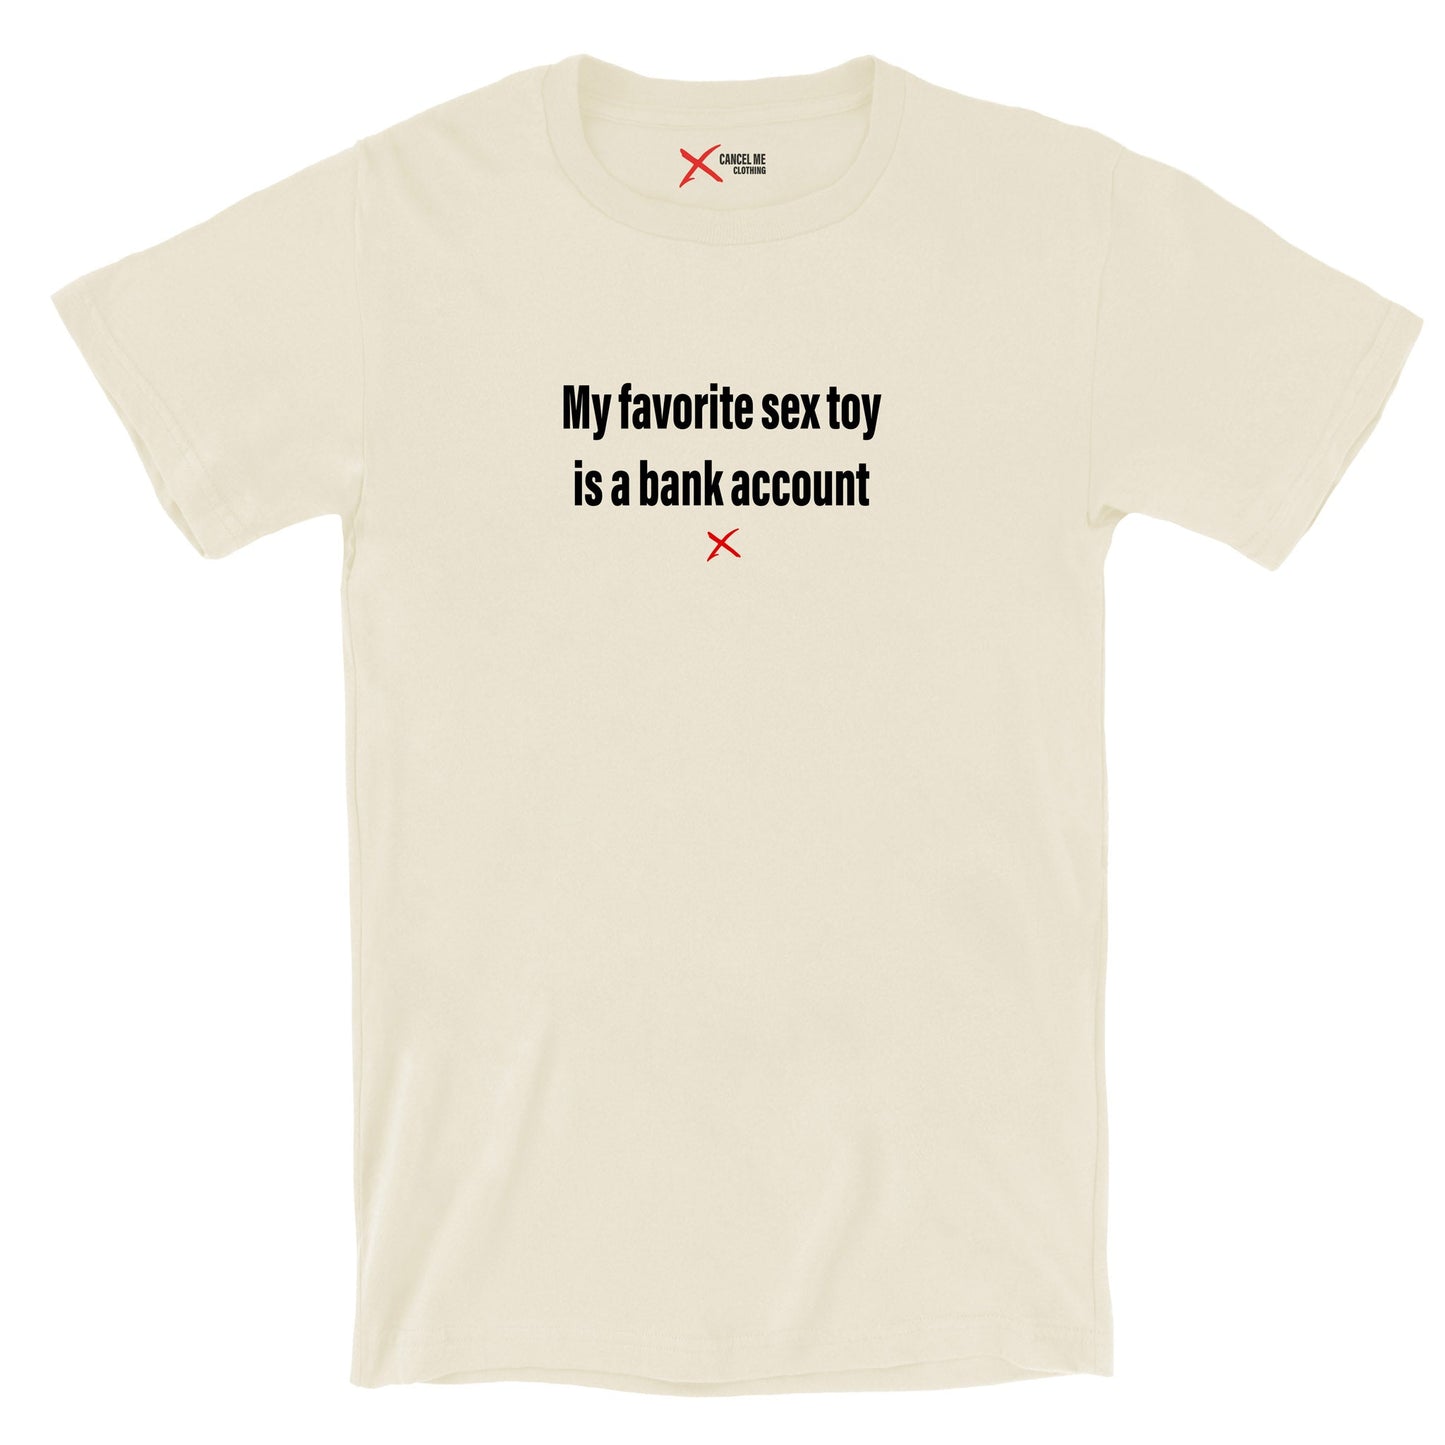 My favorite sex toy is a bank account - Shirt